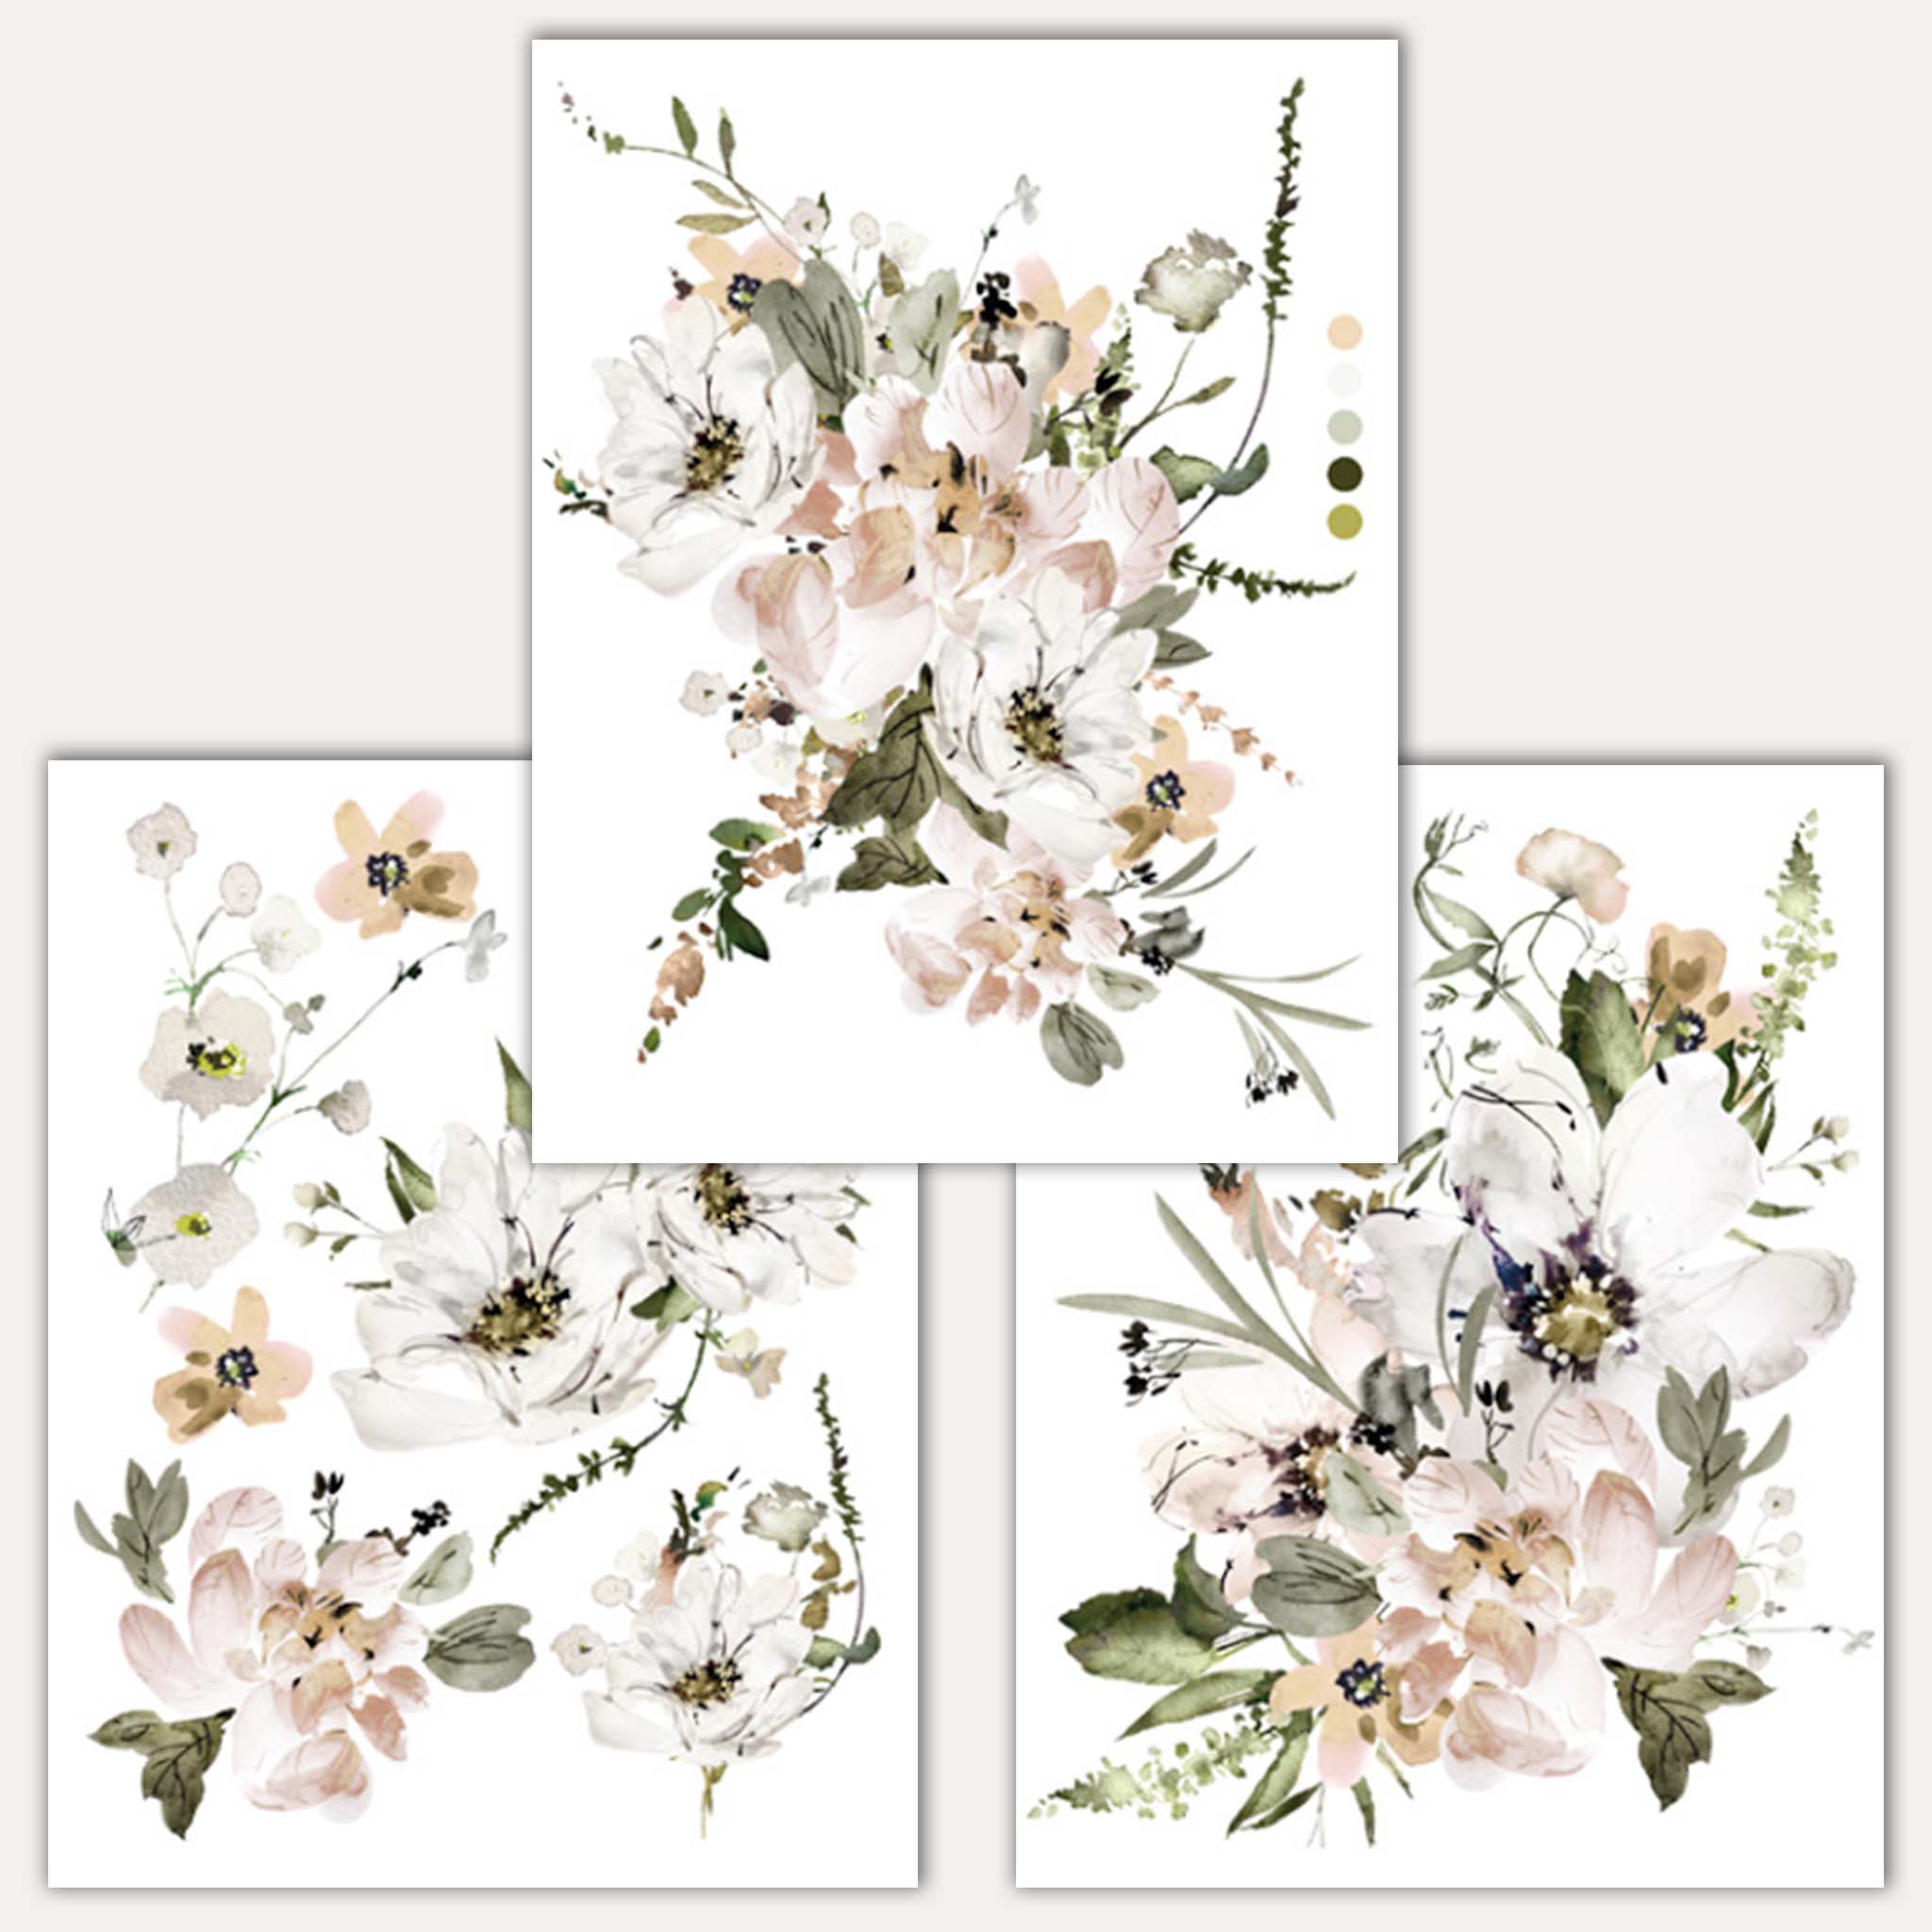 Three sheets of small rub-on transfers against a beige background feature beautiful blush, cream, and white floral bouquets, along with loose flowers and sprigs of greenery.